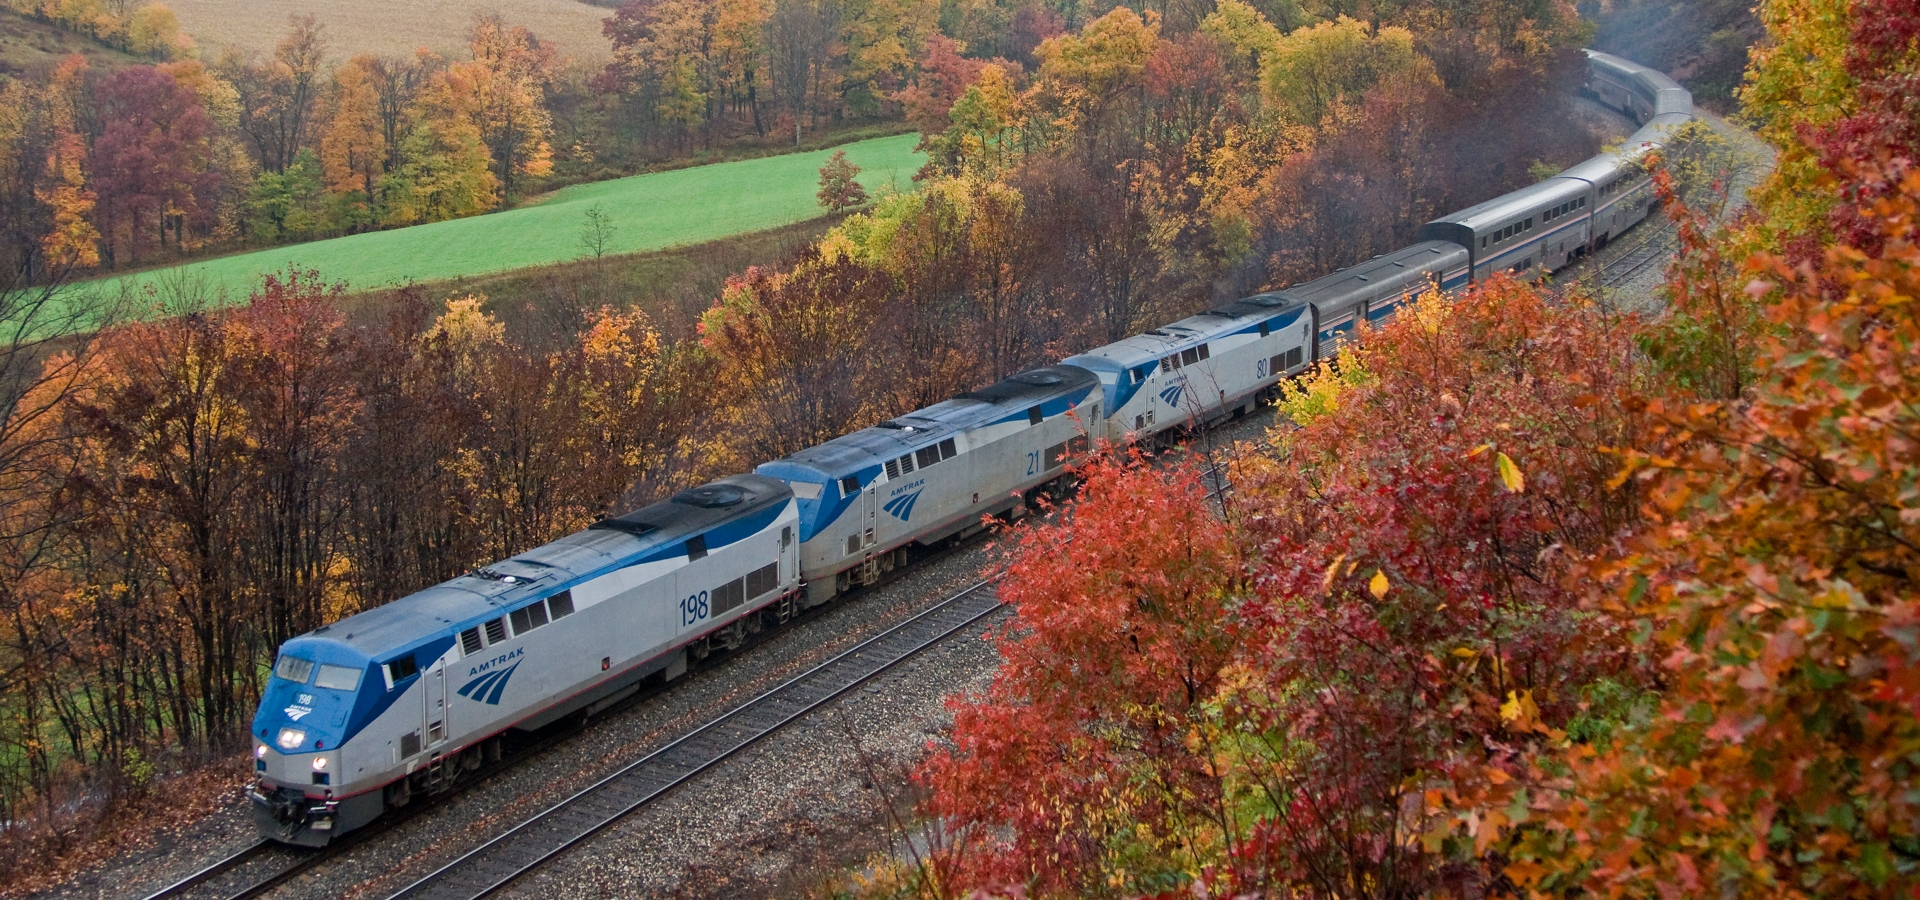 Amtrak's Capital Limited train route through field with autumn foliage